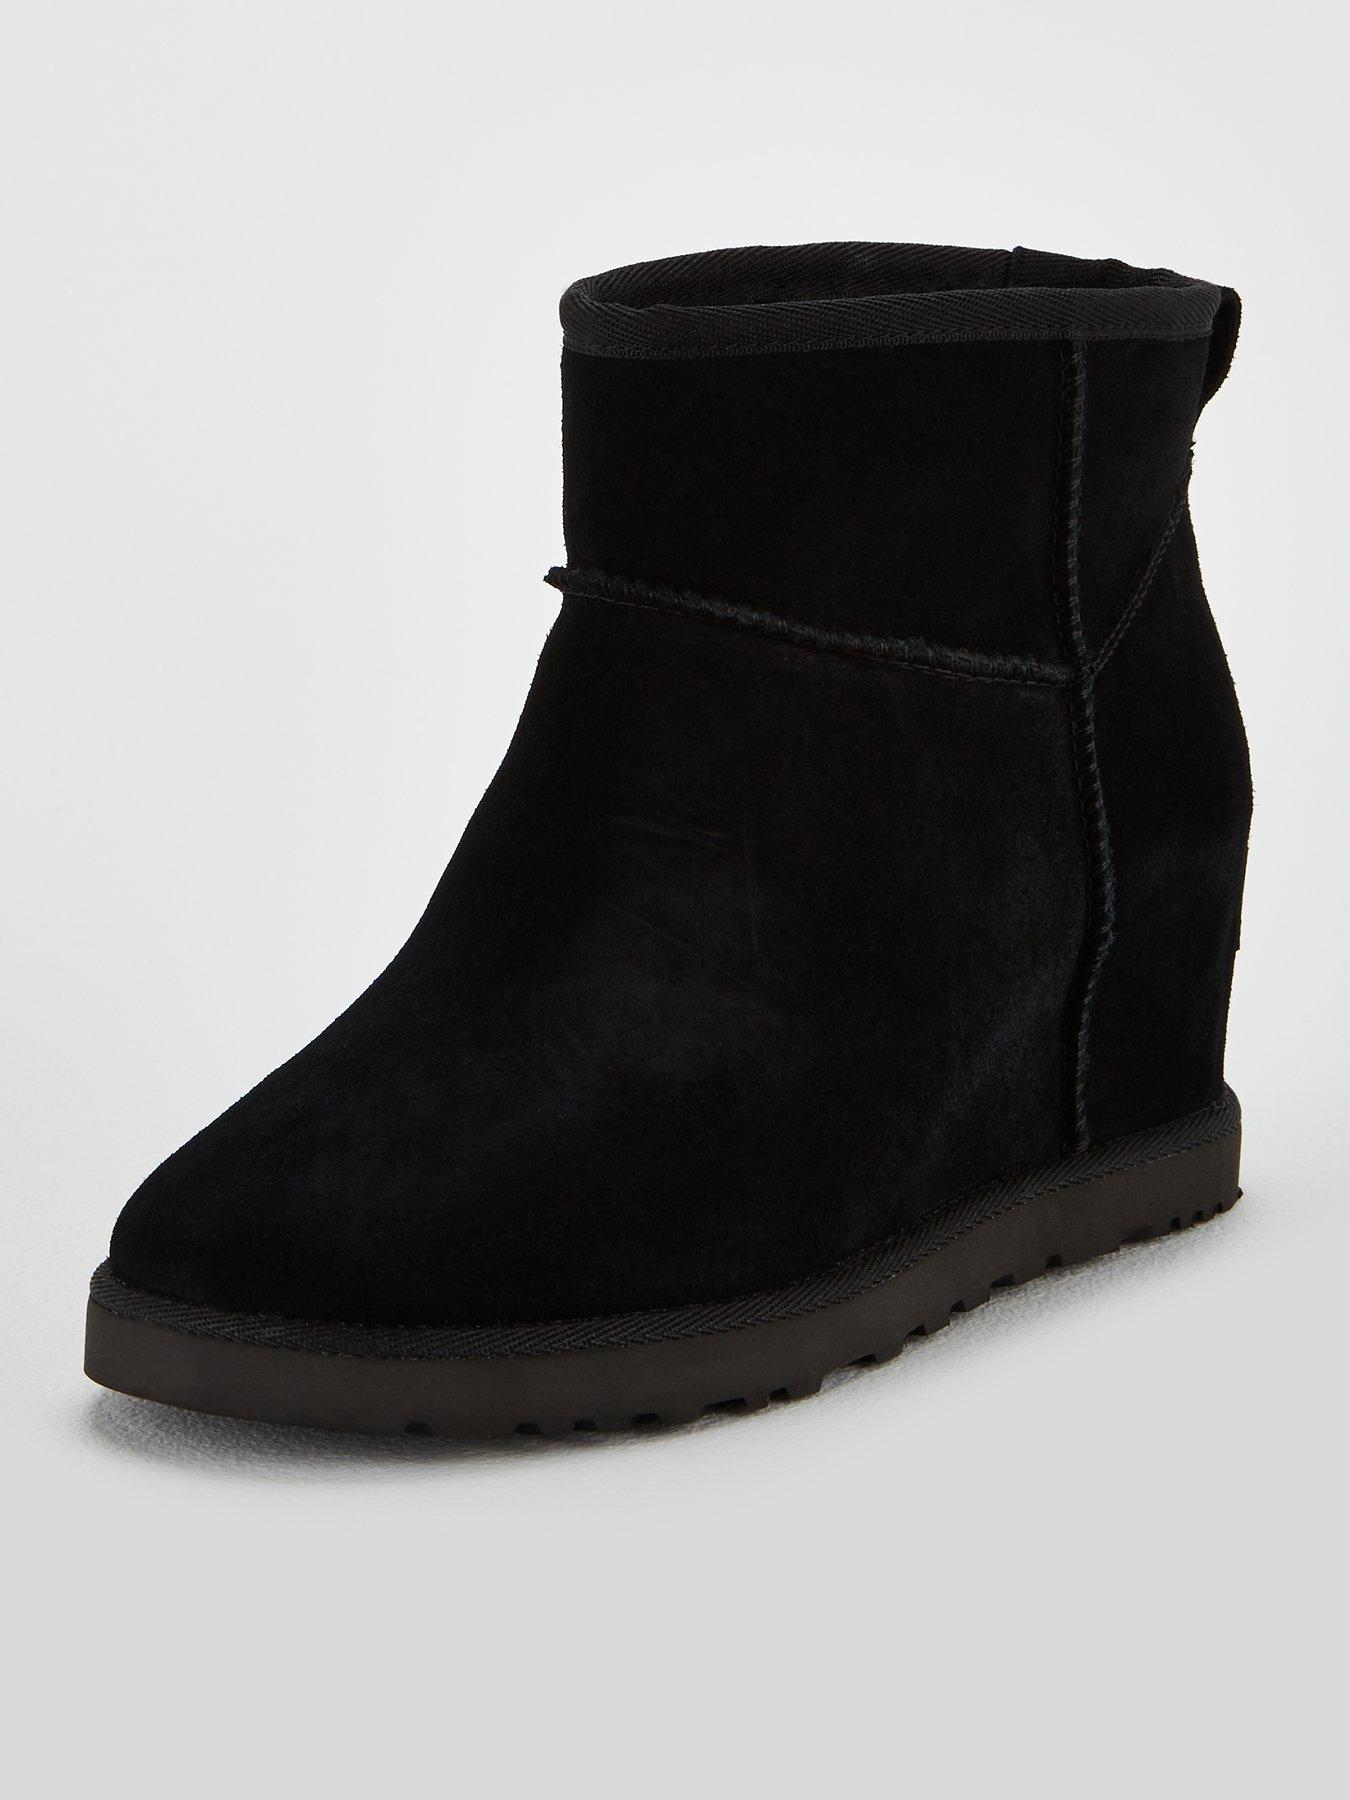 ugg leather wedge boots